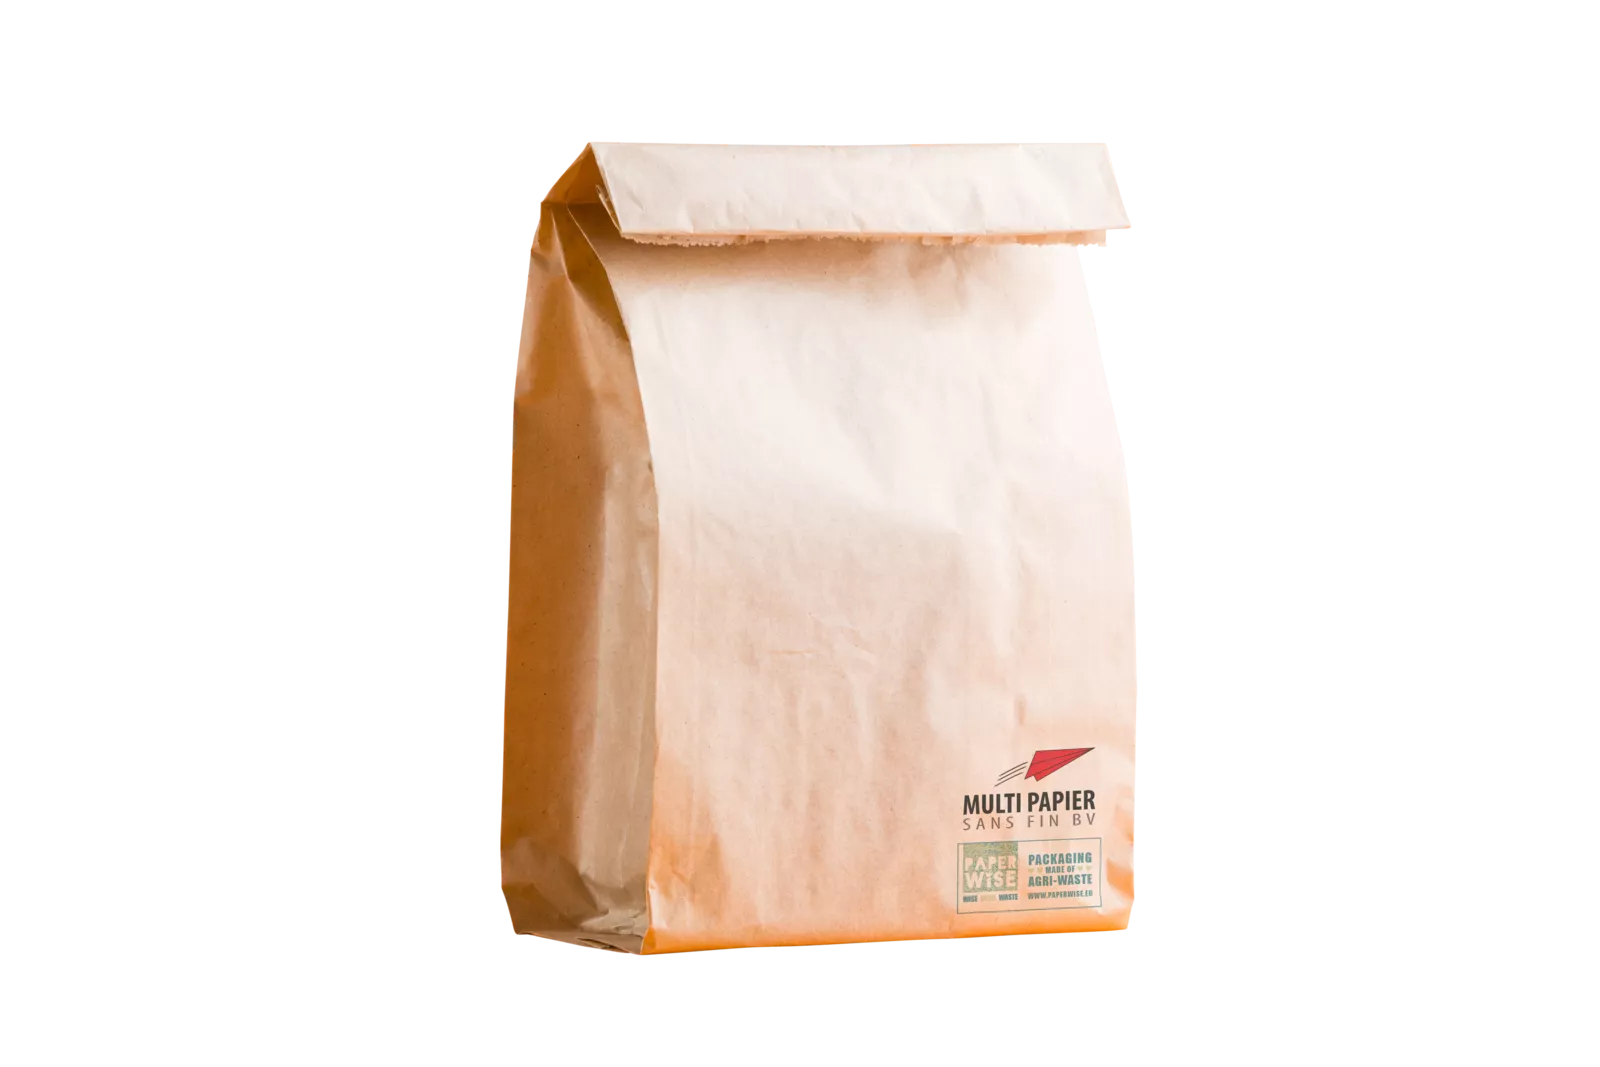 PaperWise eco friendly paper bread bag natural windowbag compostable recycable packaging multipapiersansfin c